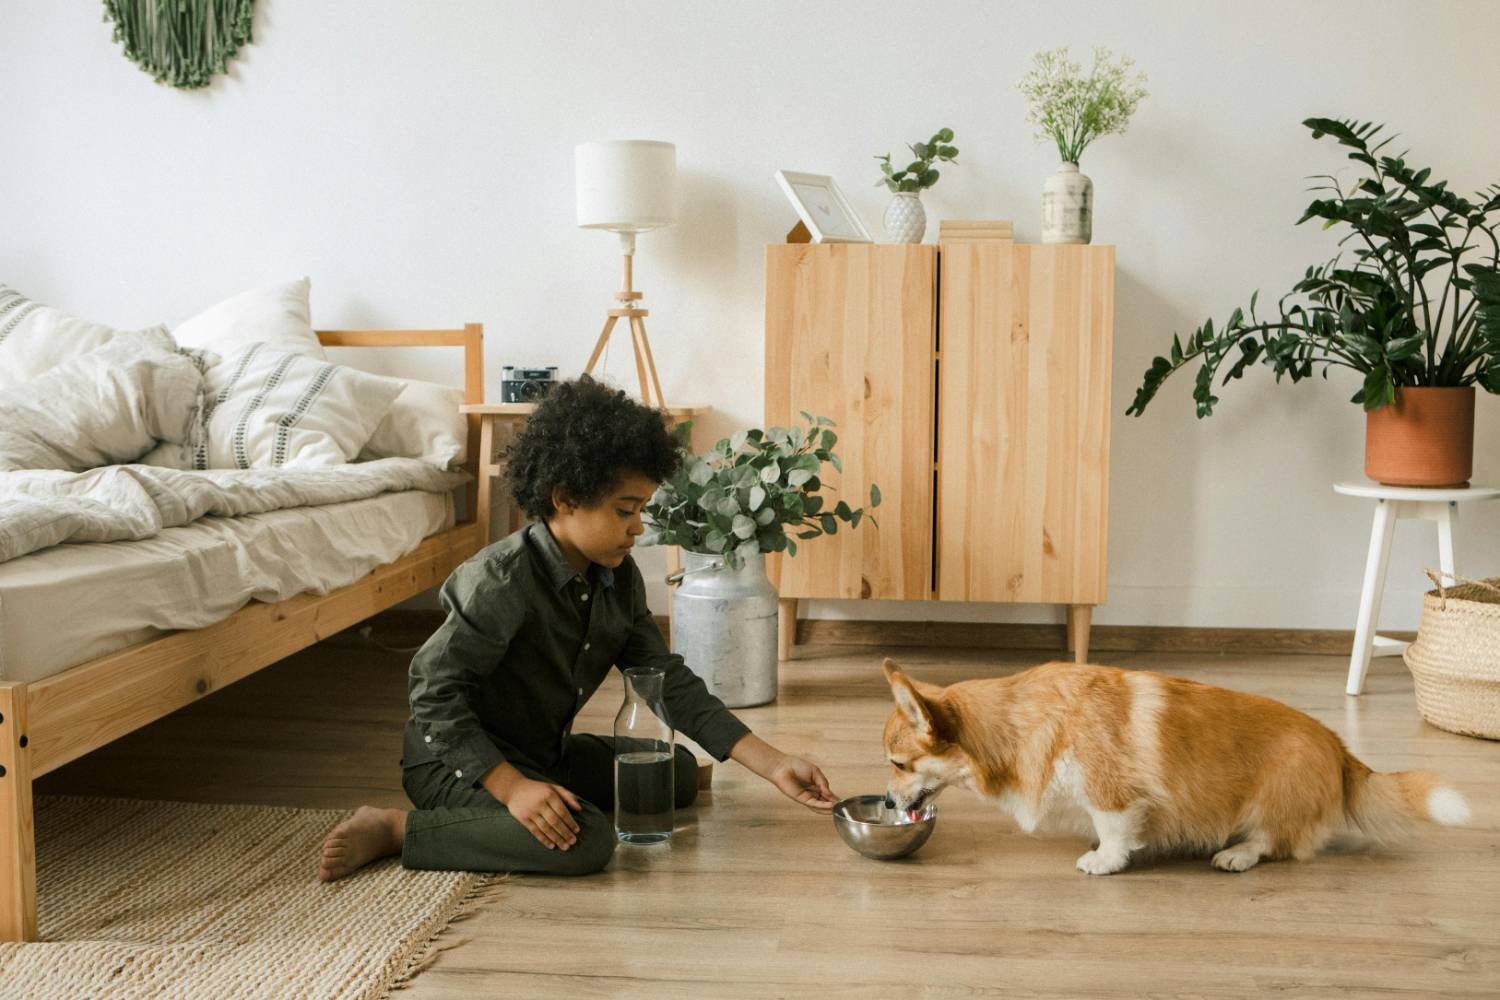 A young boy feeds a Corgi in a cozy bedroom, making one wonder what to do for itchy dog after grooming